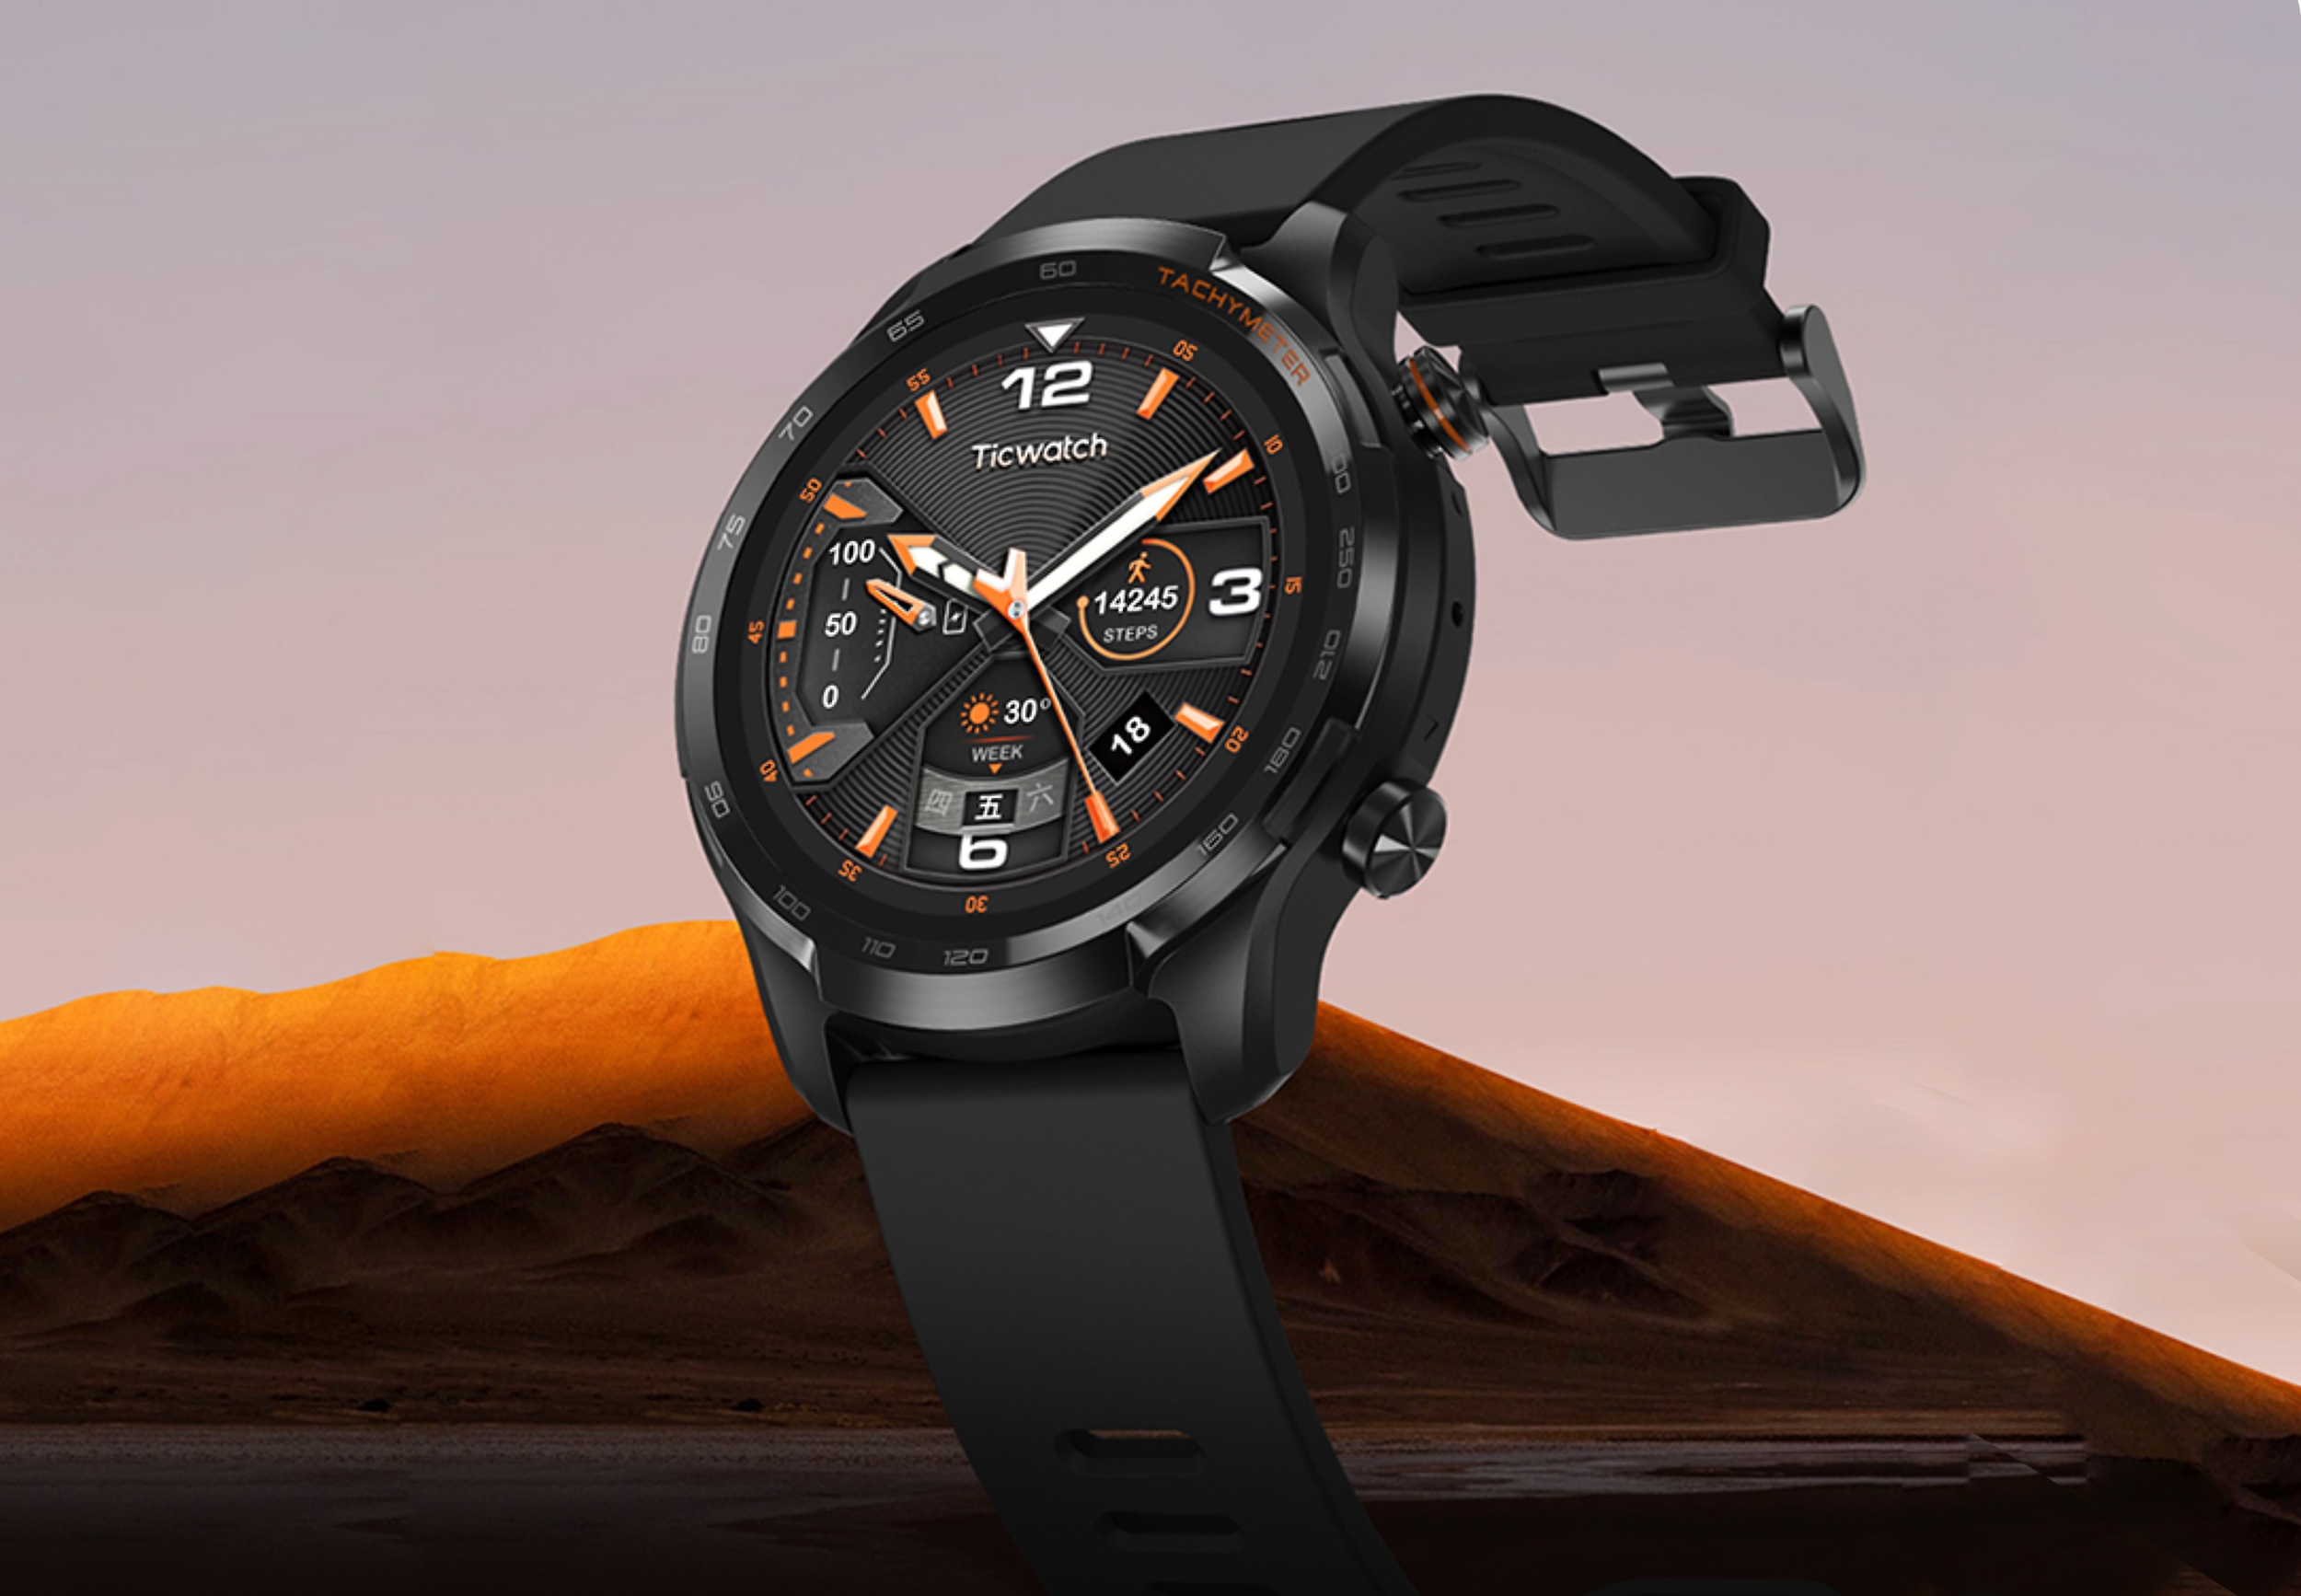 TicWatch GTW eSIM: Smartwatch with AMOLED screen, LTE support, IP68 protection and autonomy up to 30 days for $150